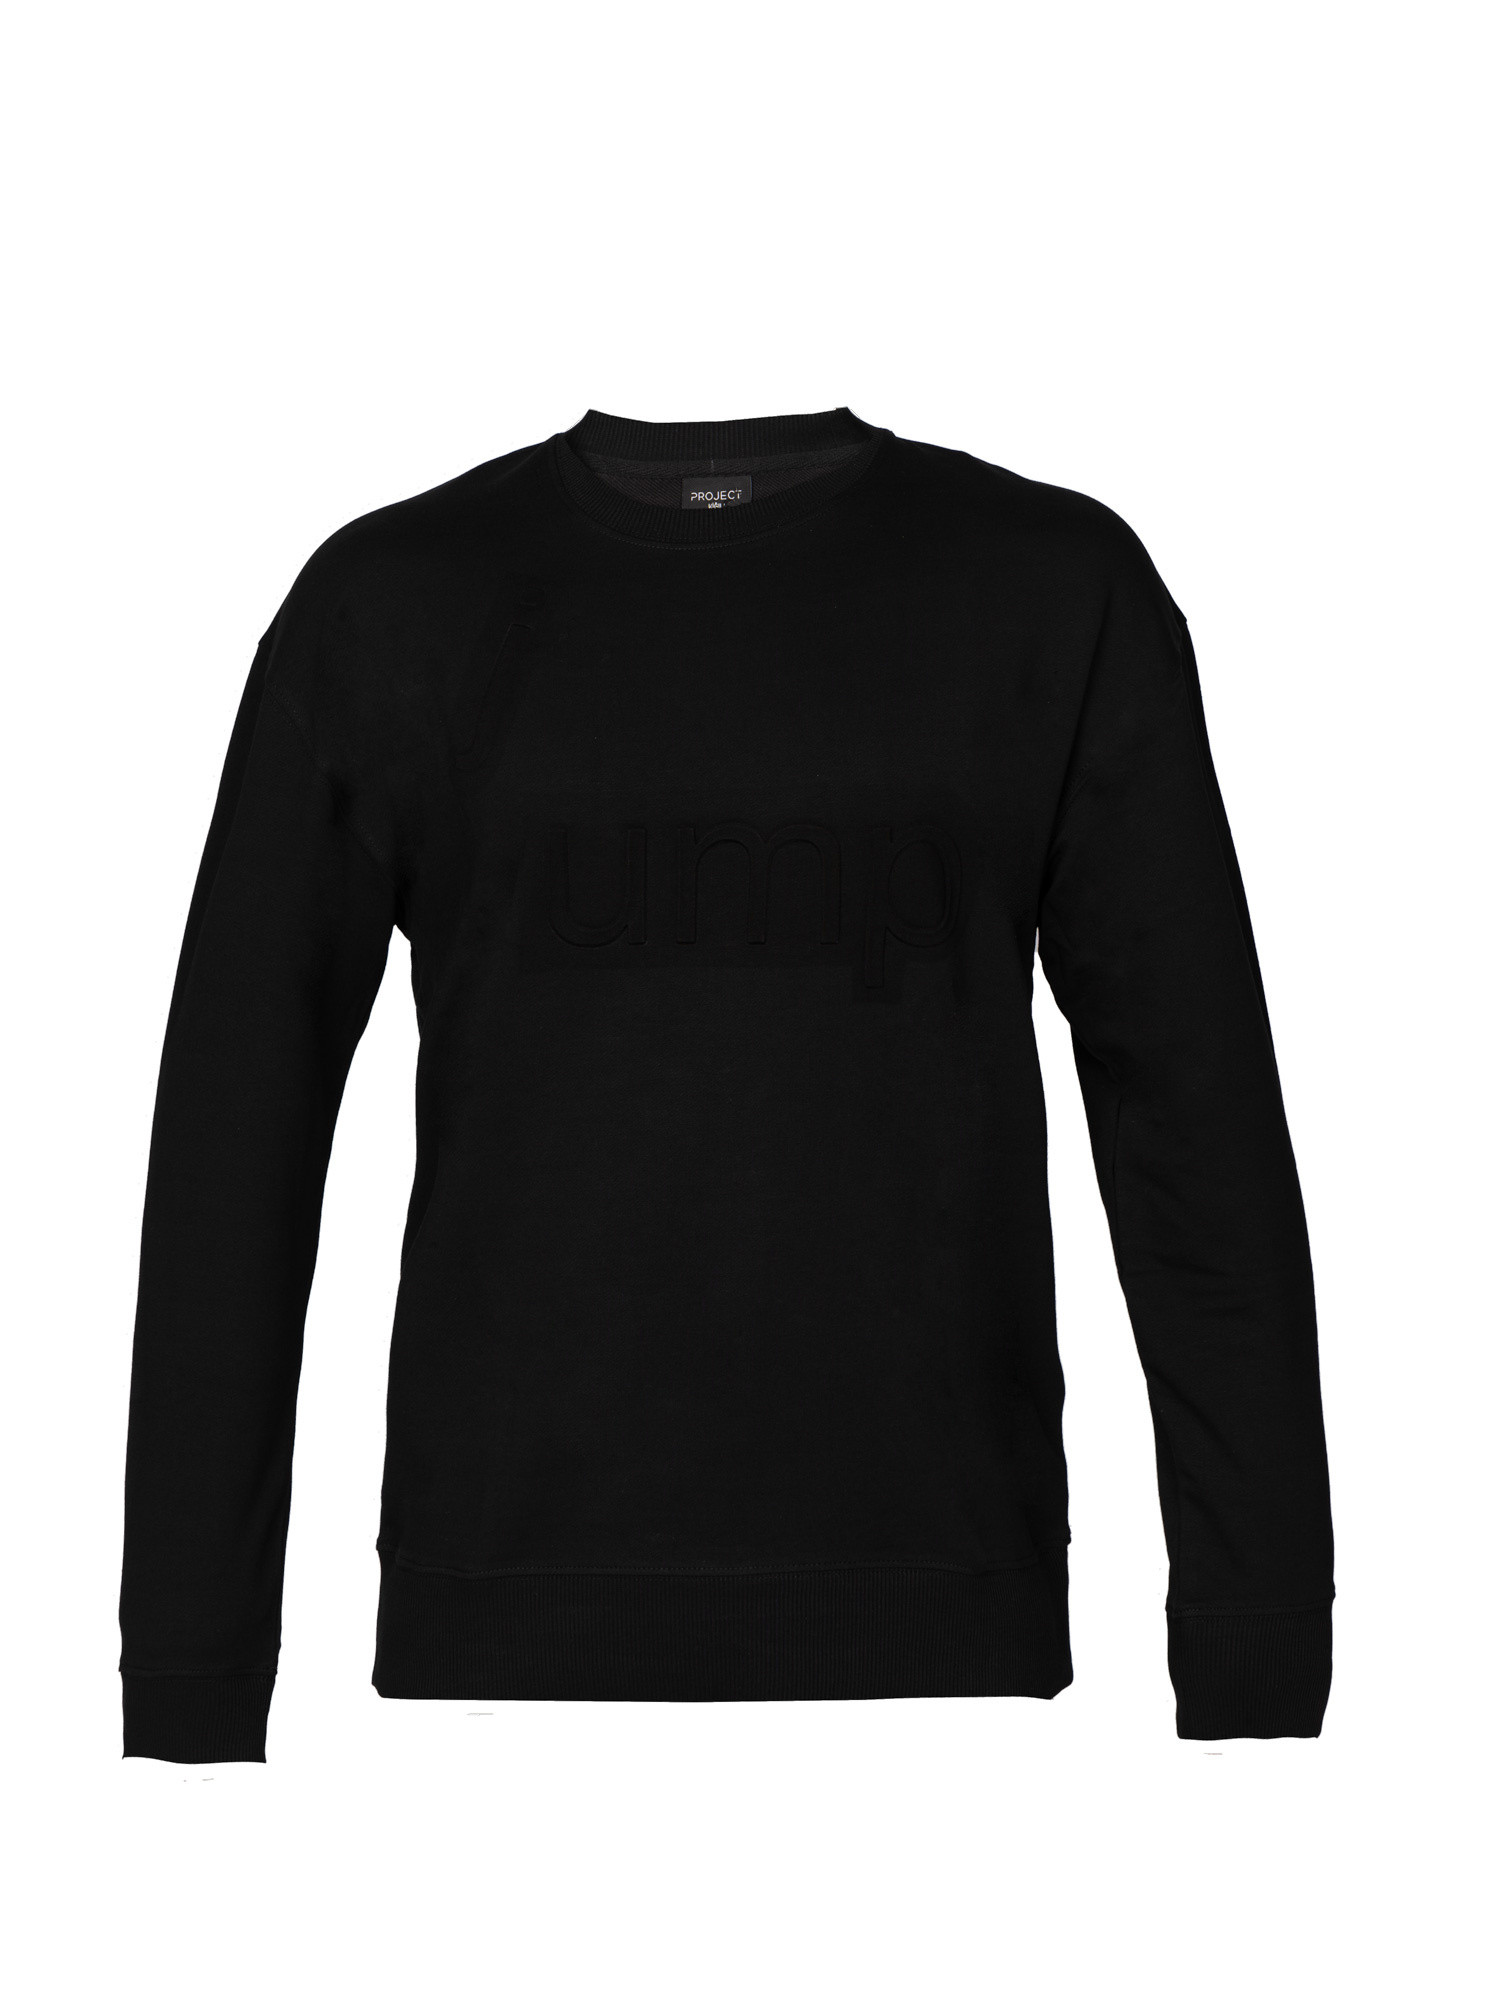 Project sweatshirt with embossed writing, Black, large image number 0